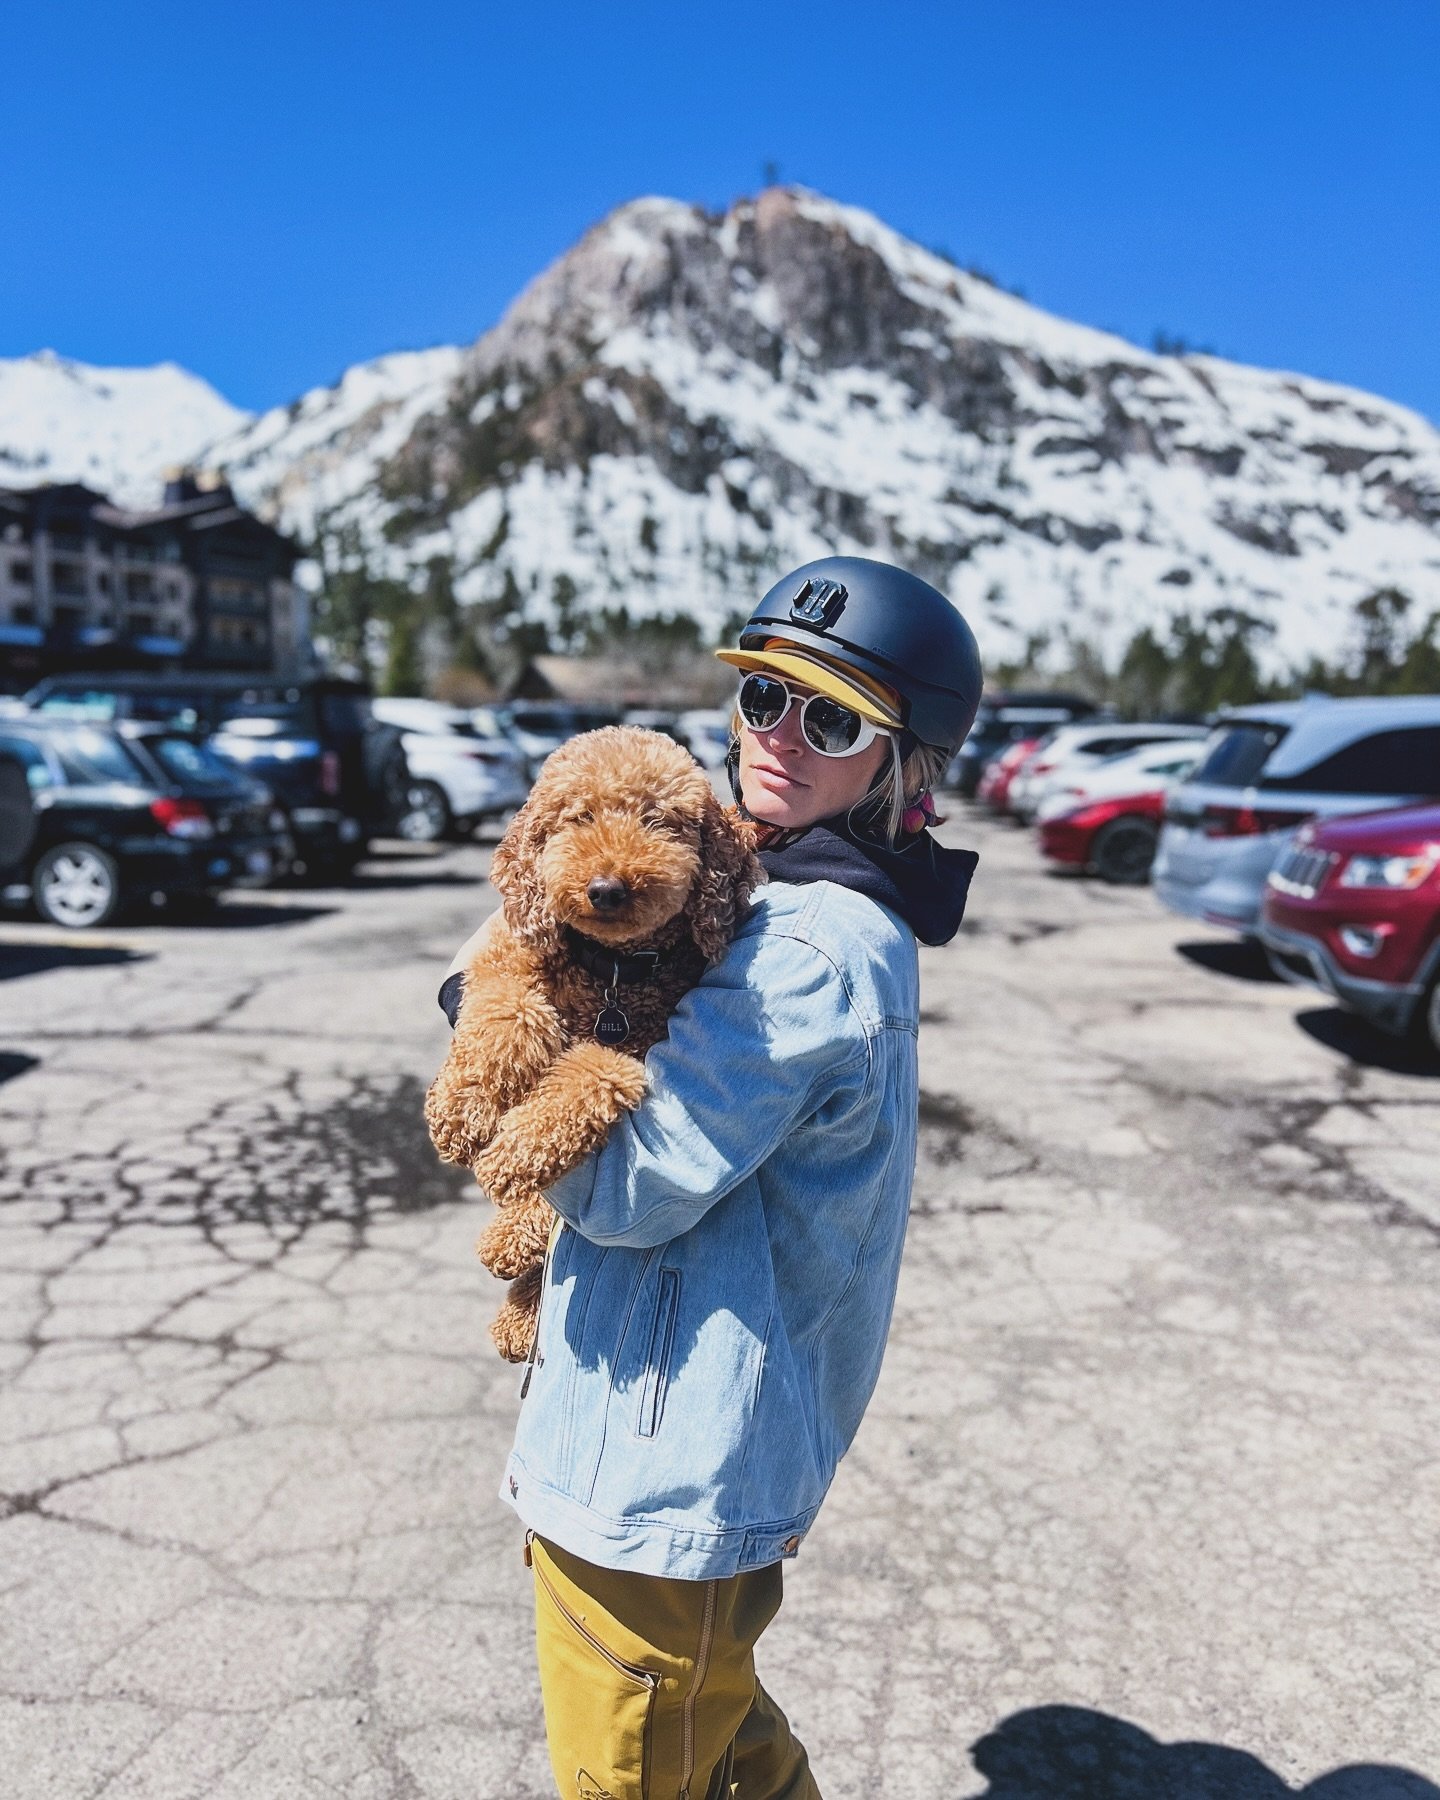 Who loves spring skiing more, me or Bill?!
.
#springskiingcapital #billthepoodle